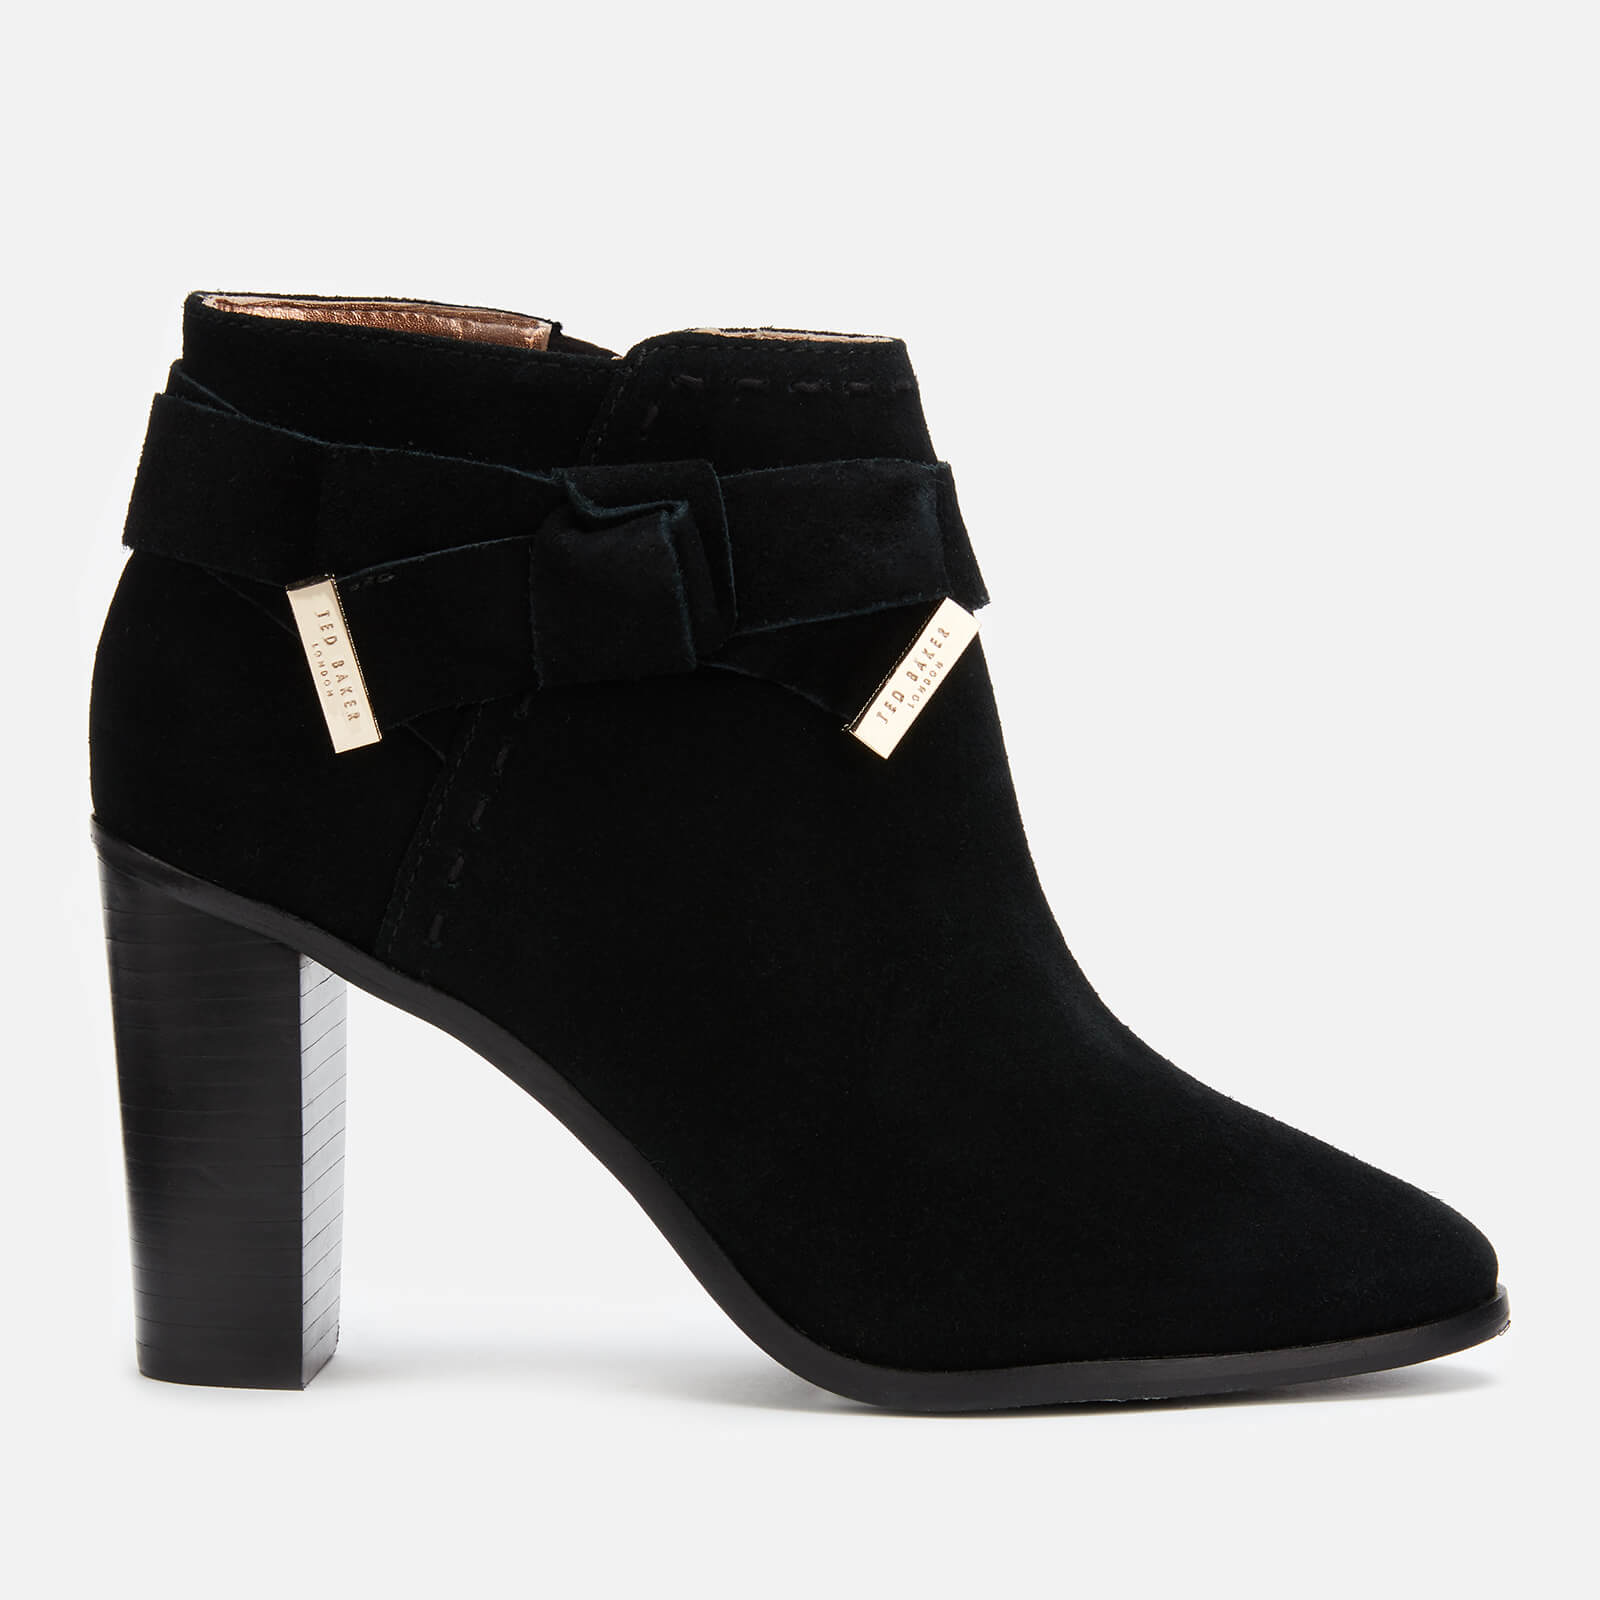 Ted Baker Women's Anaedi Suede Heeled Ankle Boots - Black - UK 4 - Black